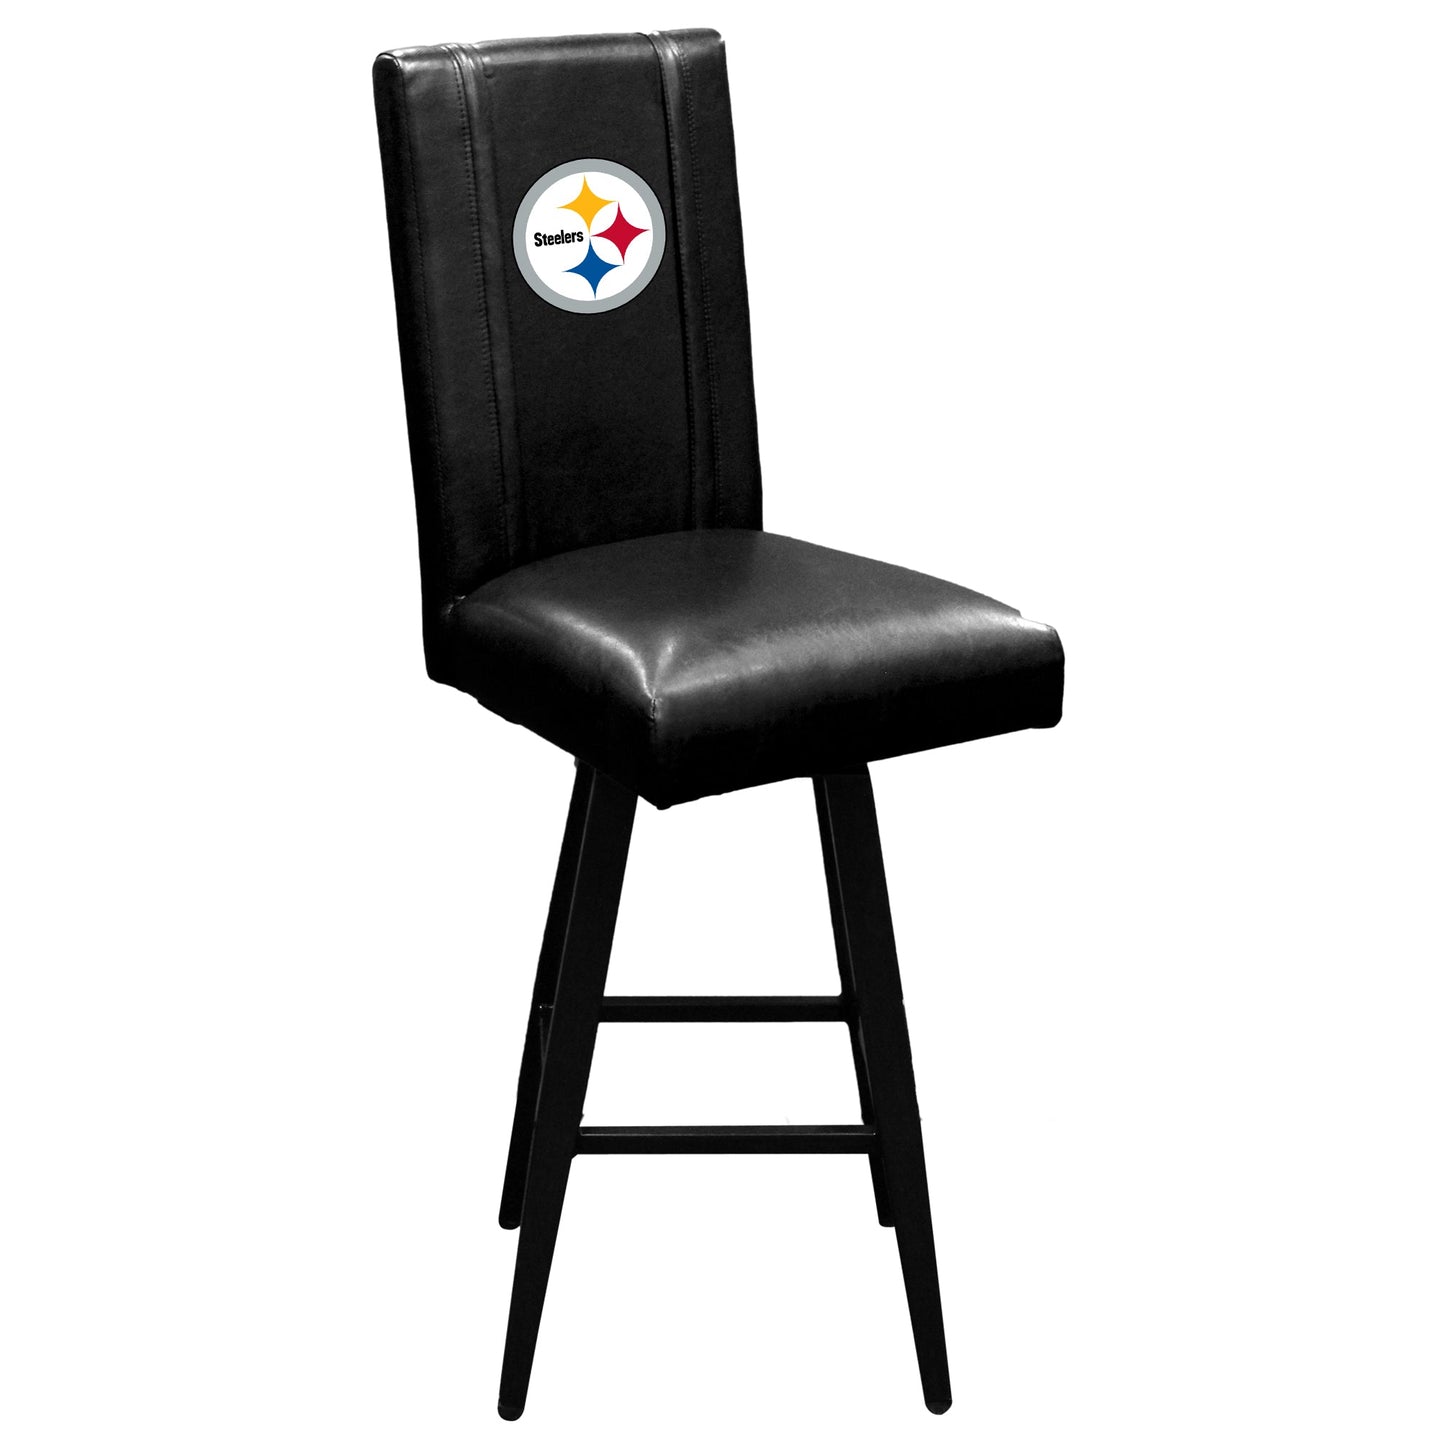 Swivel Bar Stool 2000 With Pittsburgh Steelers Primary Logo